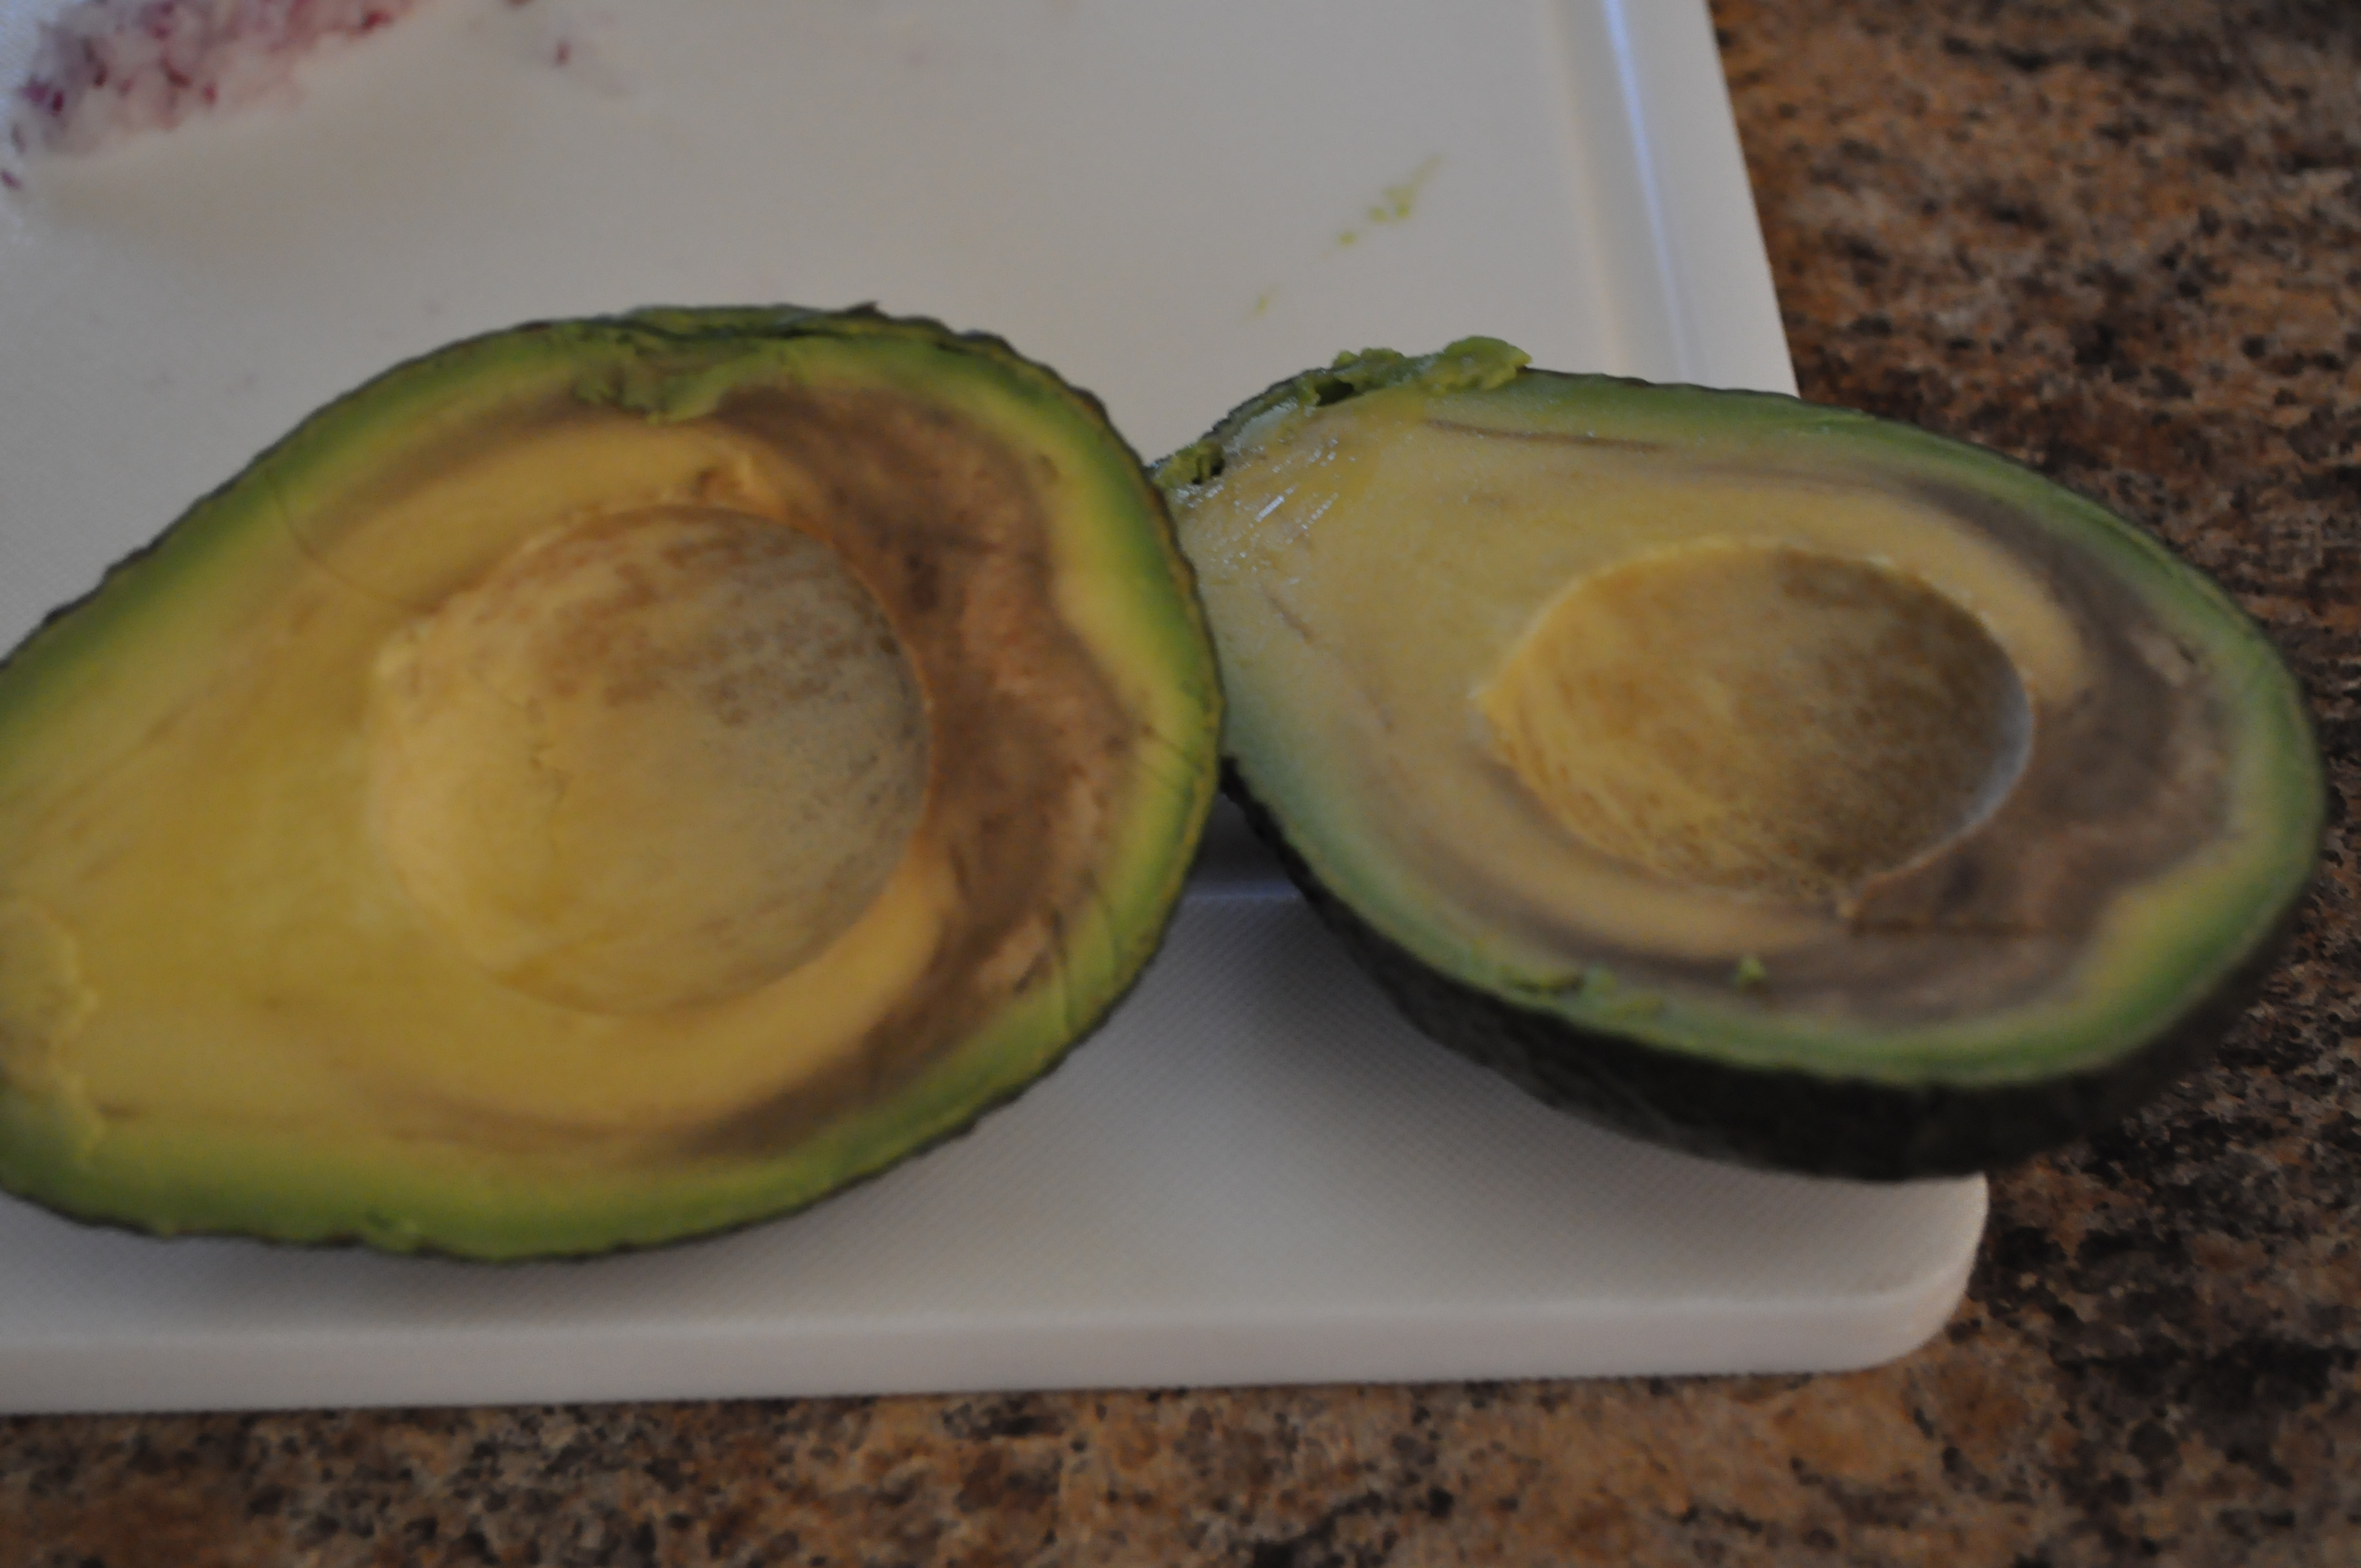 How can a person tell if an avocado is rotten?